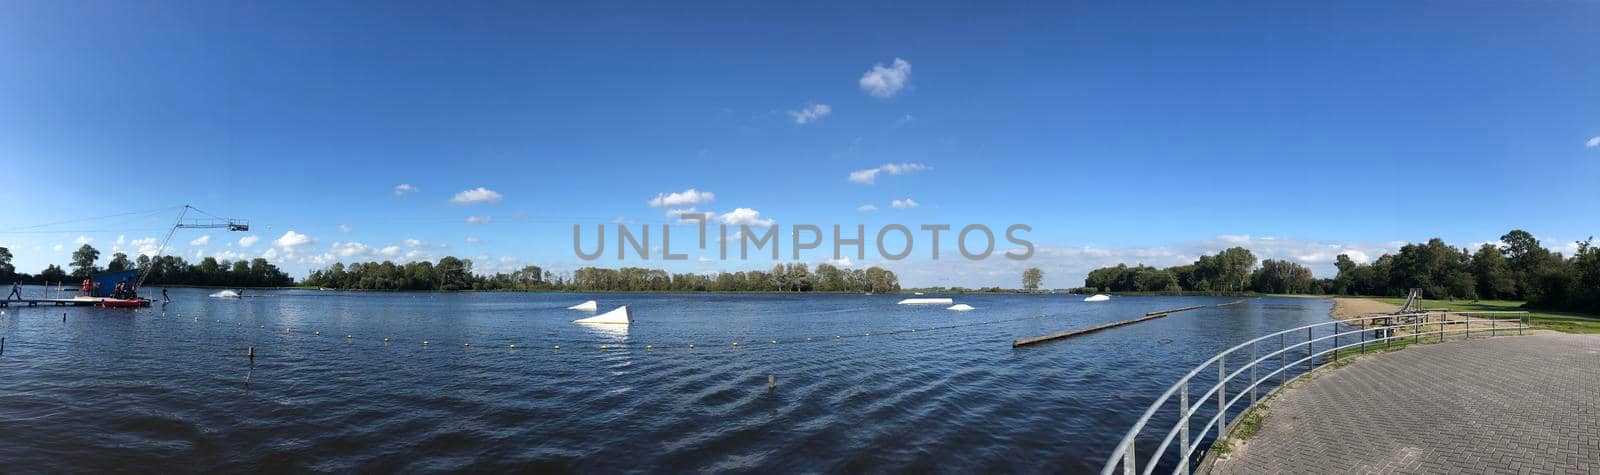 Panorama from the water ski course around Sneek, Friesland The Netherlands